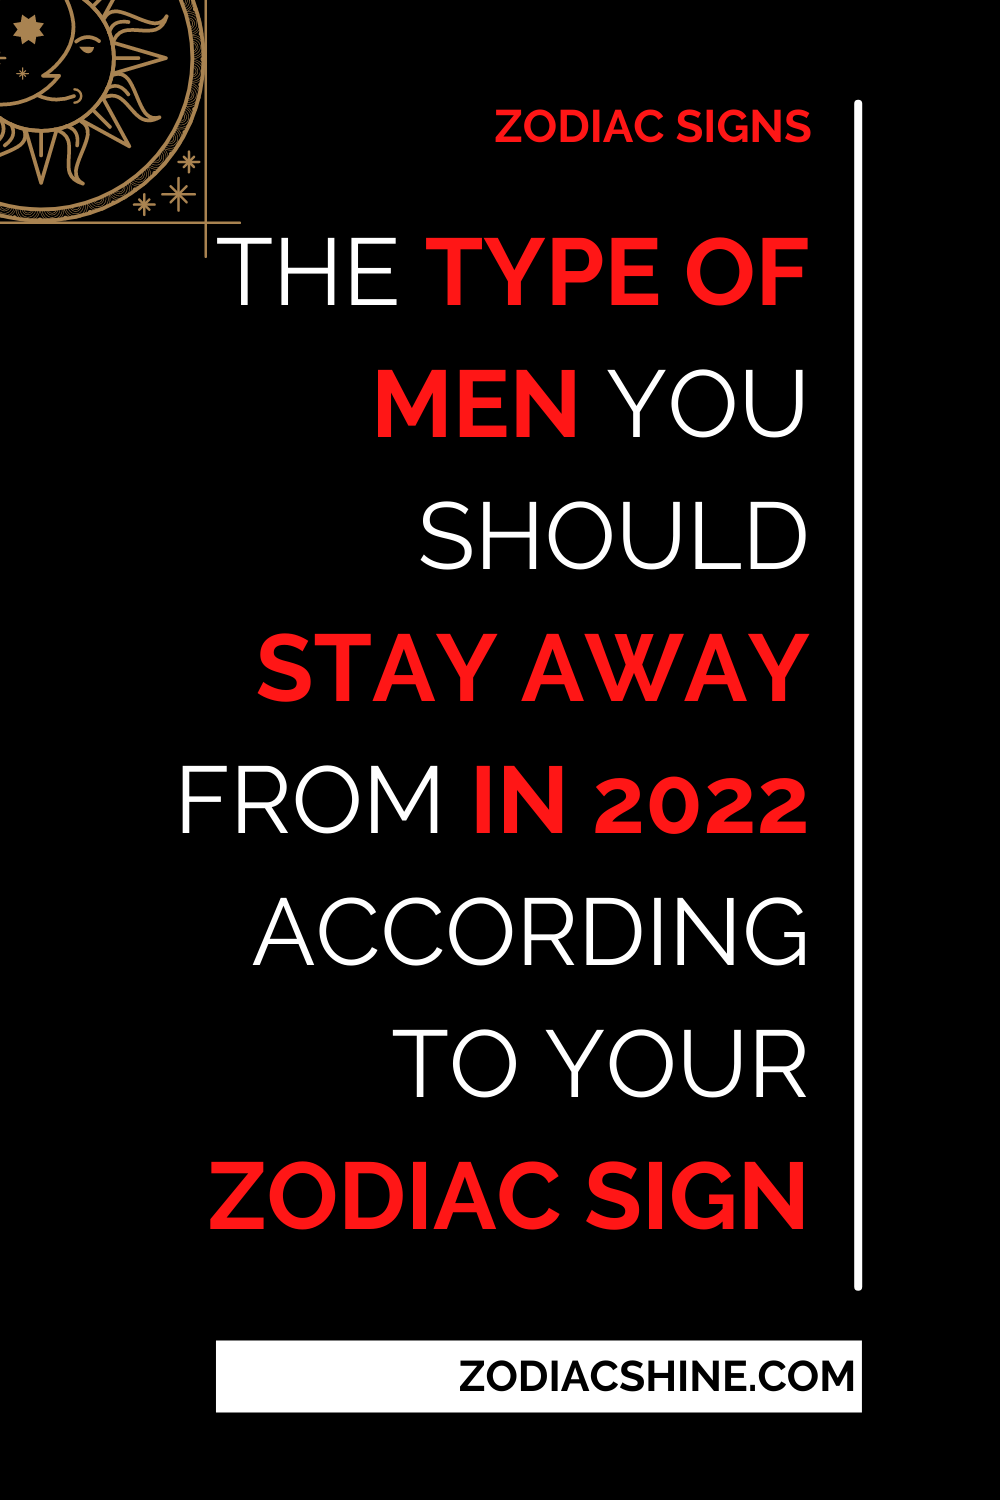 The Type Of Men You Should Stay Away From In 2022 According To Your Zodiac Sign